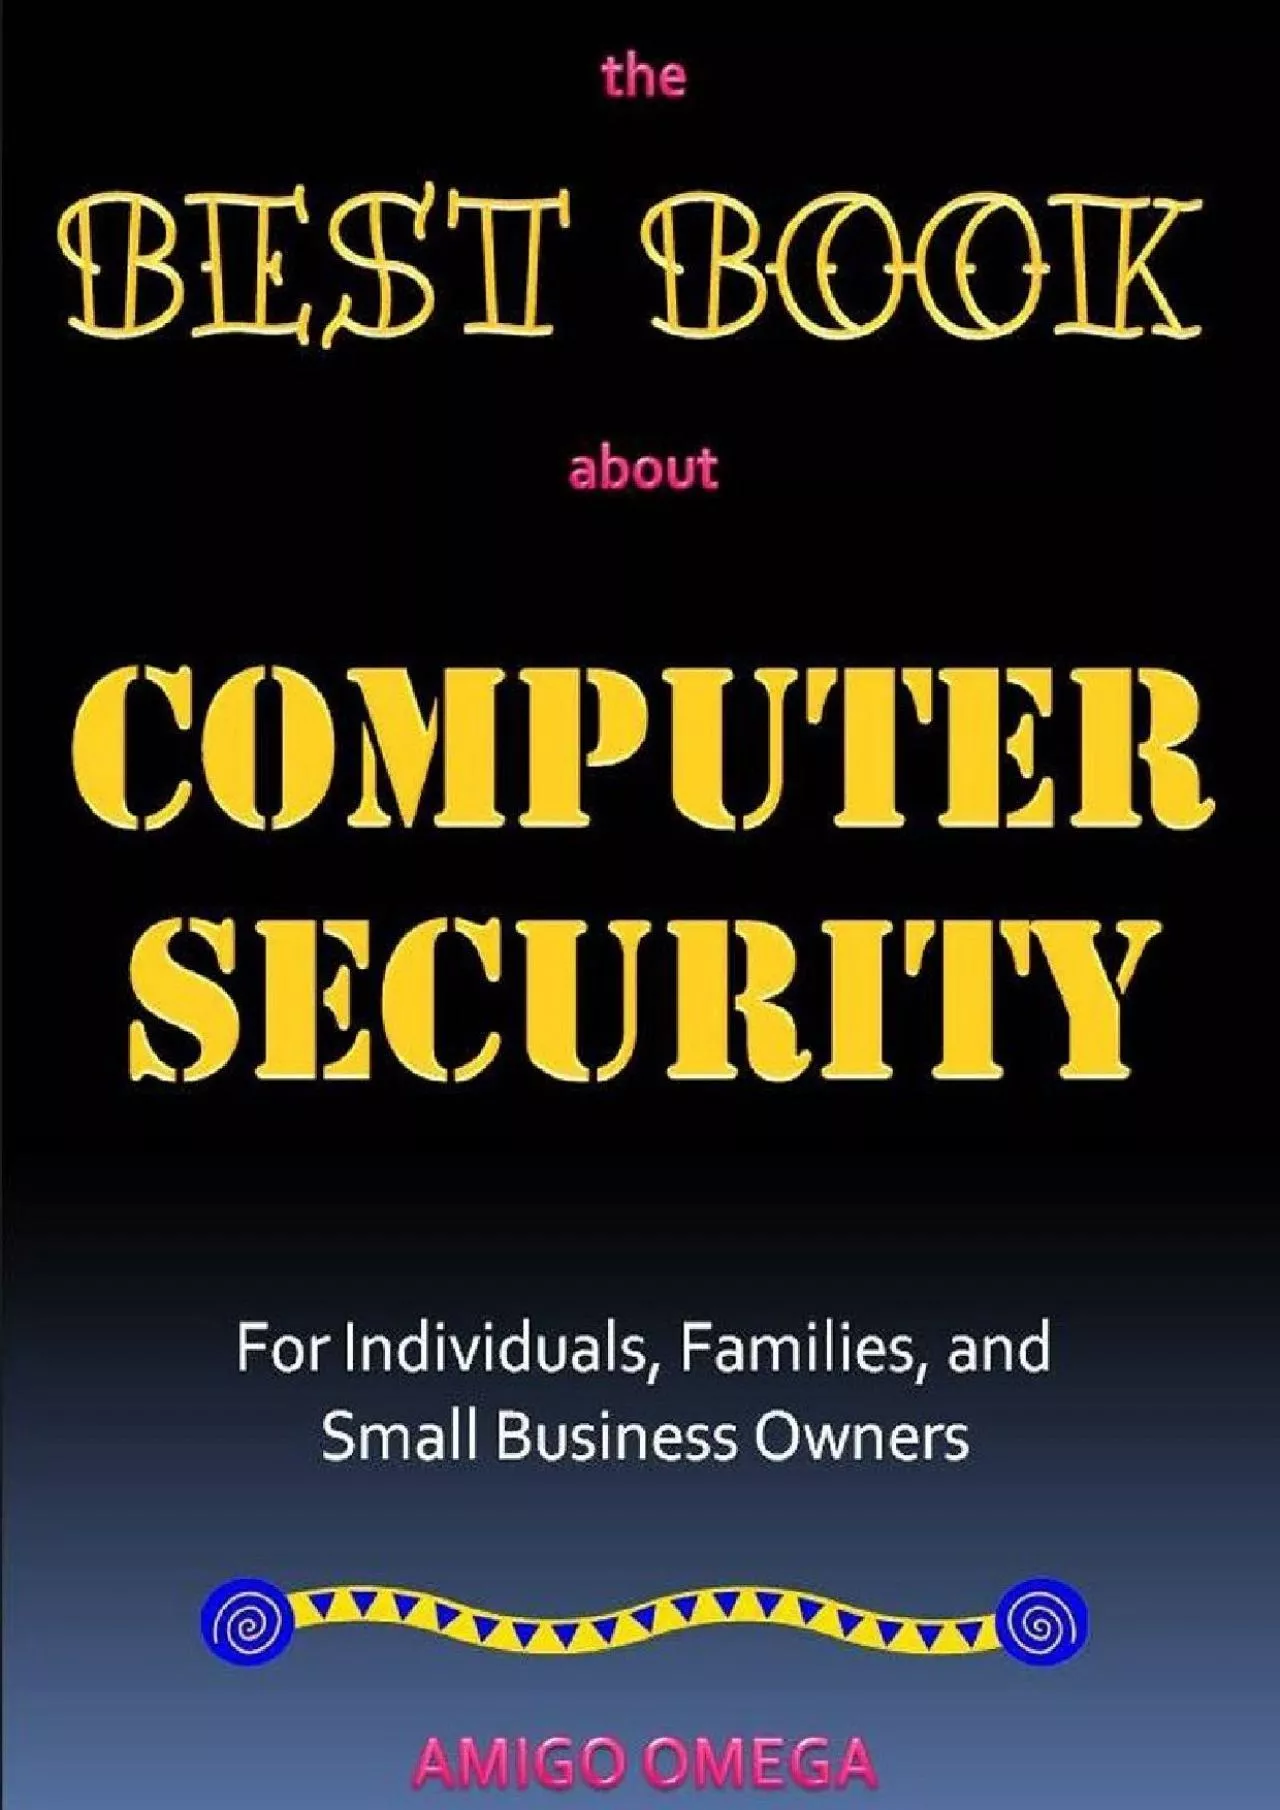 [DOWLOAD]-The Best Book About Computer Security for Individuals, Families, and Small Business